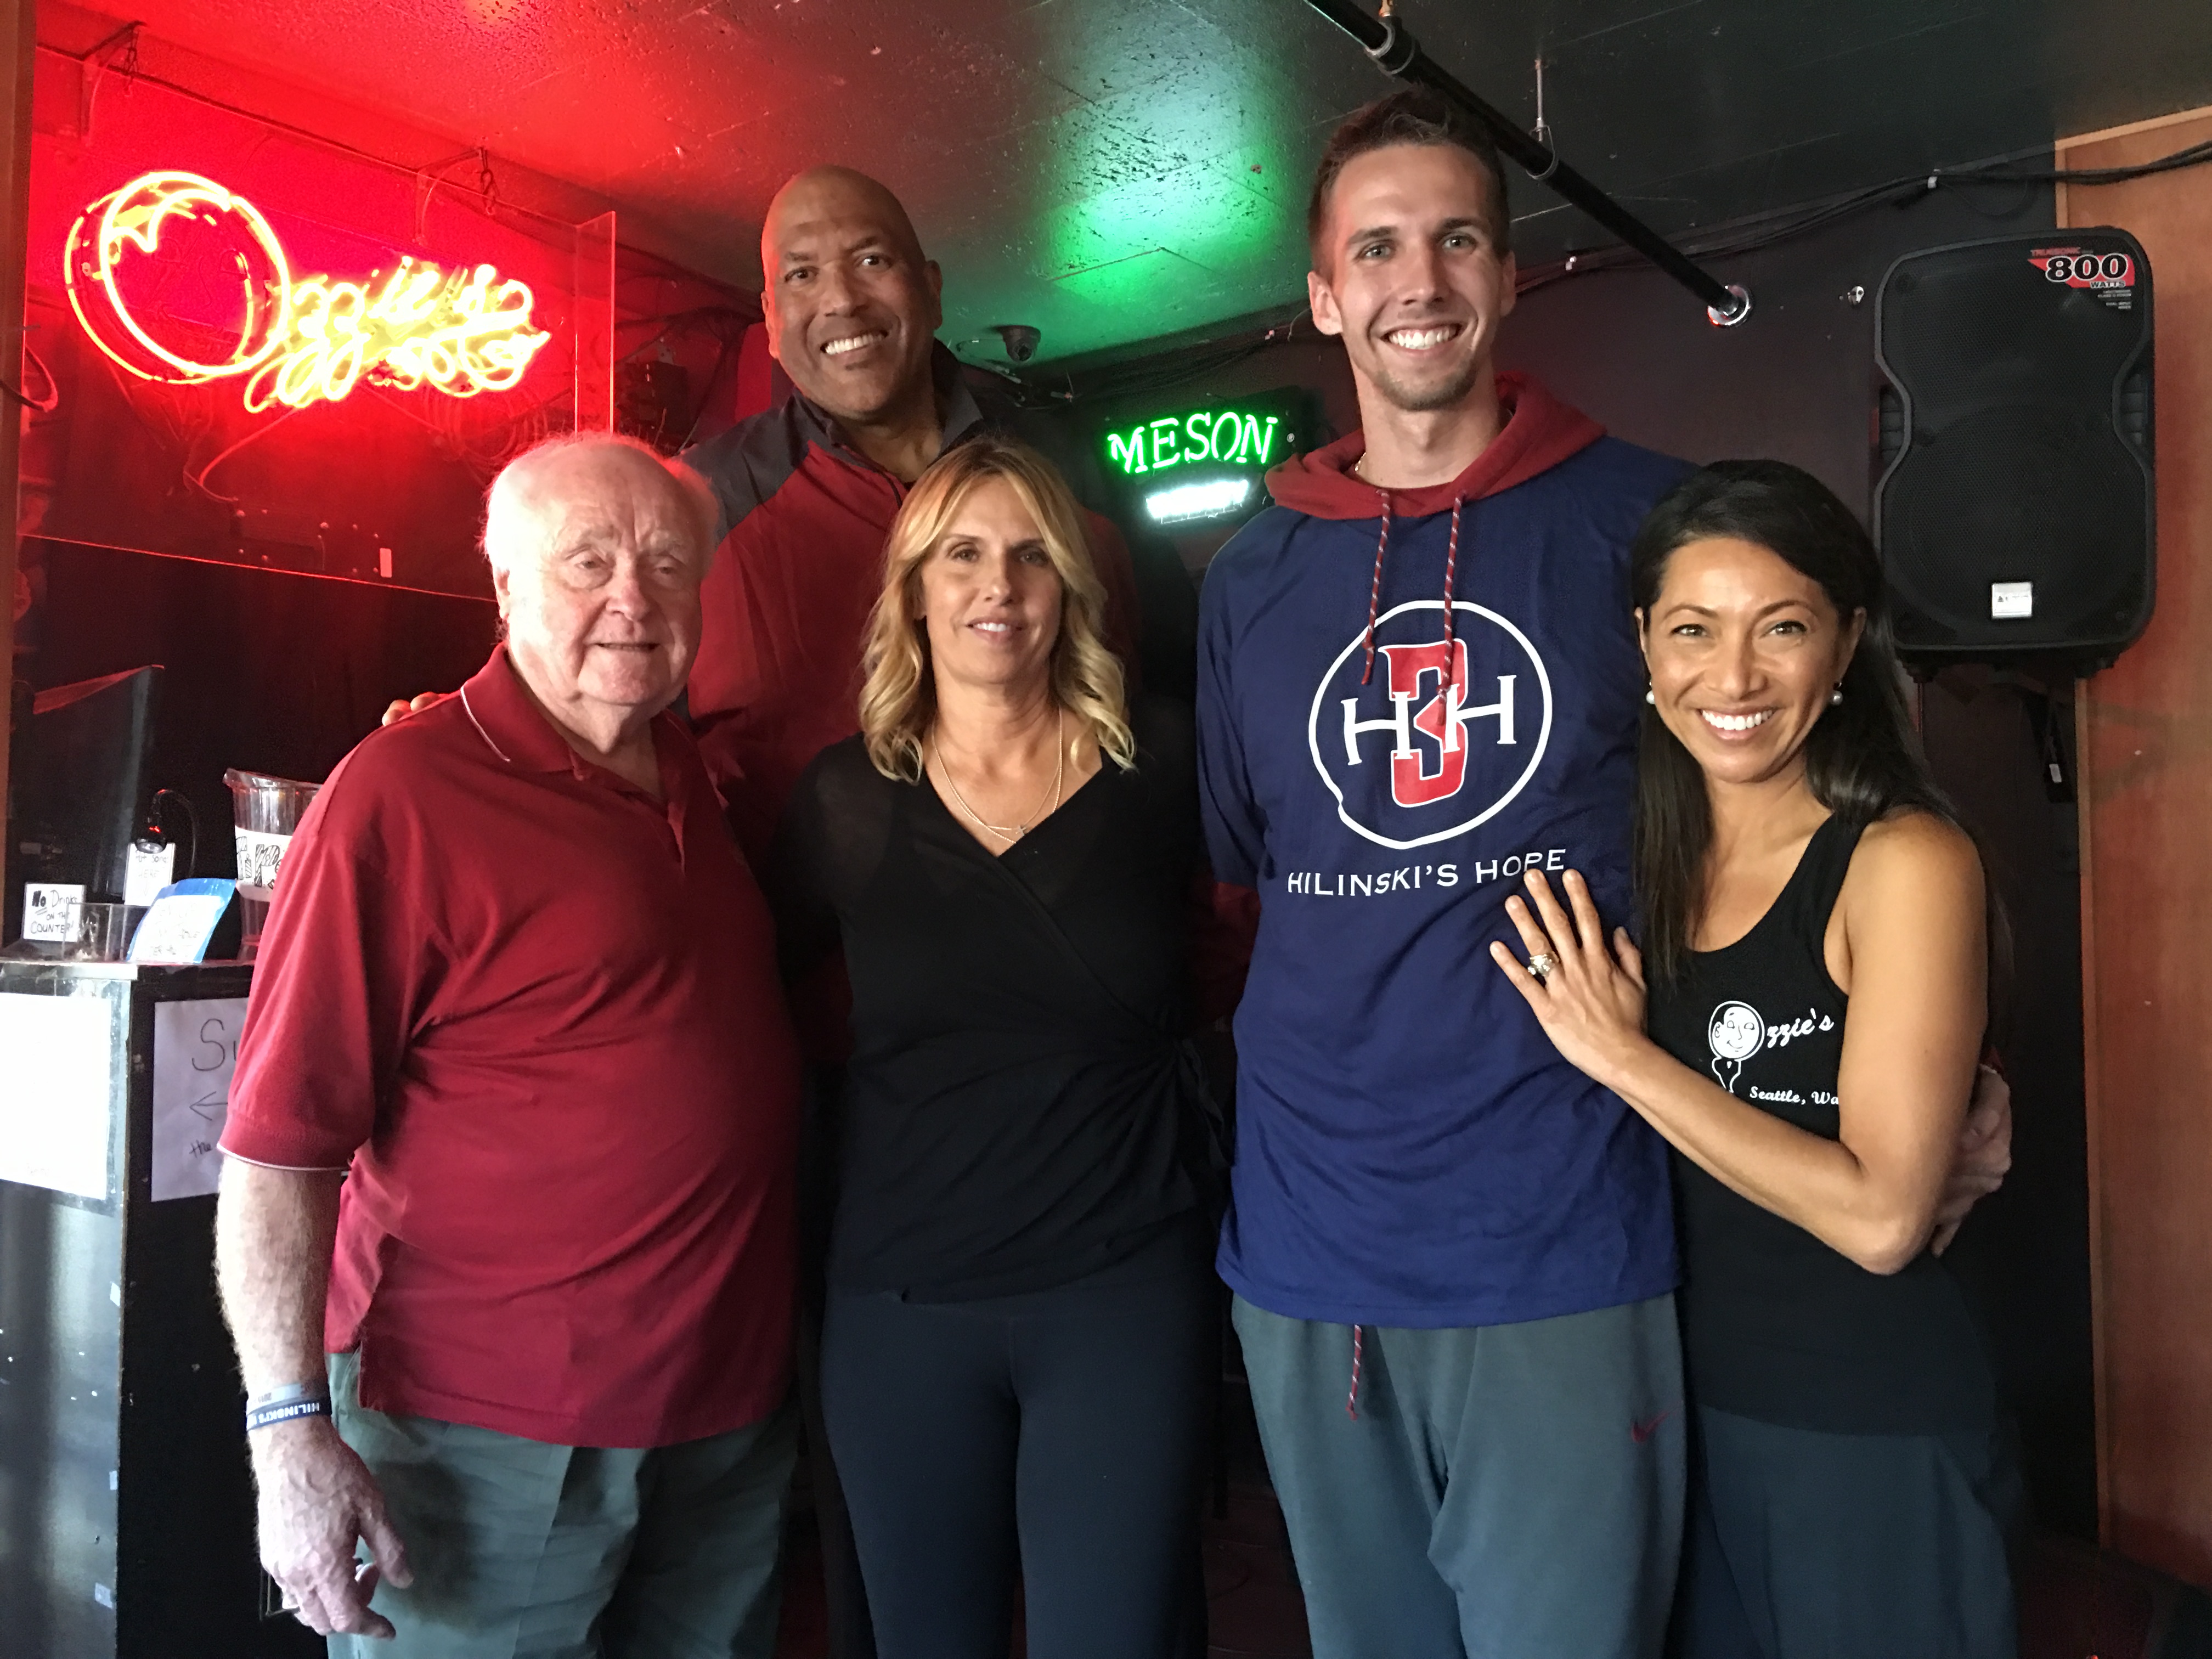 #JamesDonaldson On #MentalHealth – ‘All We Want Is Him Back.’ Pioneers Of #College Football’s #MentalHealth Movement, Mark & Kym #Hilinski Continue To Share Son’s Story